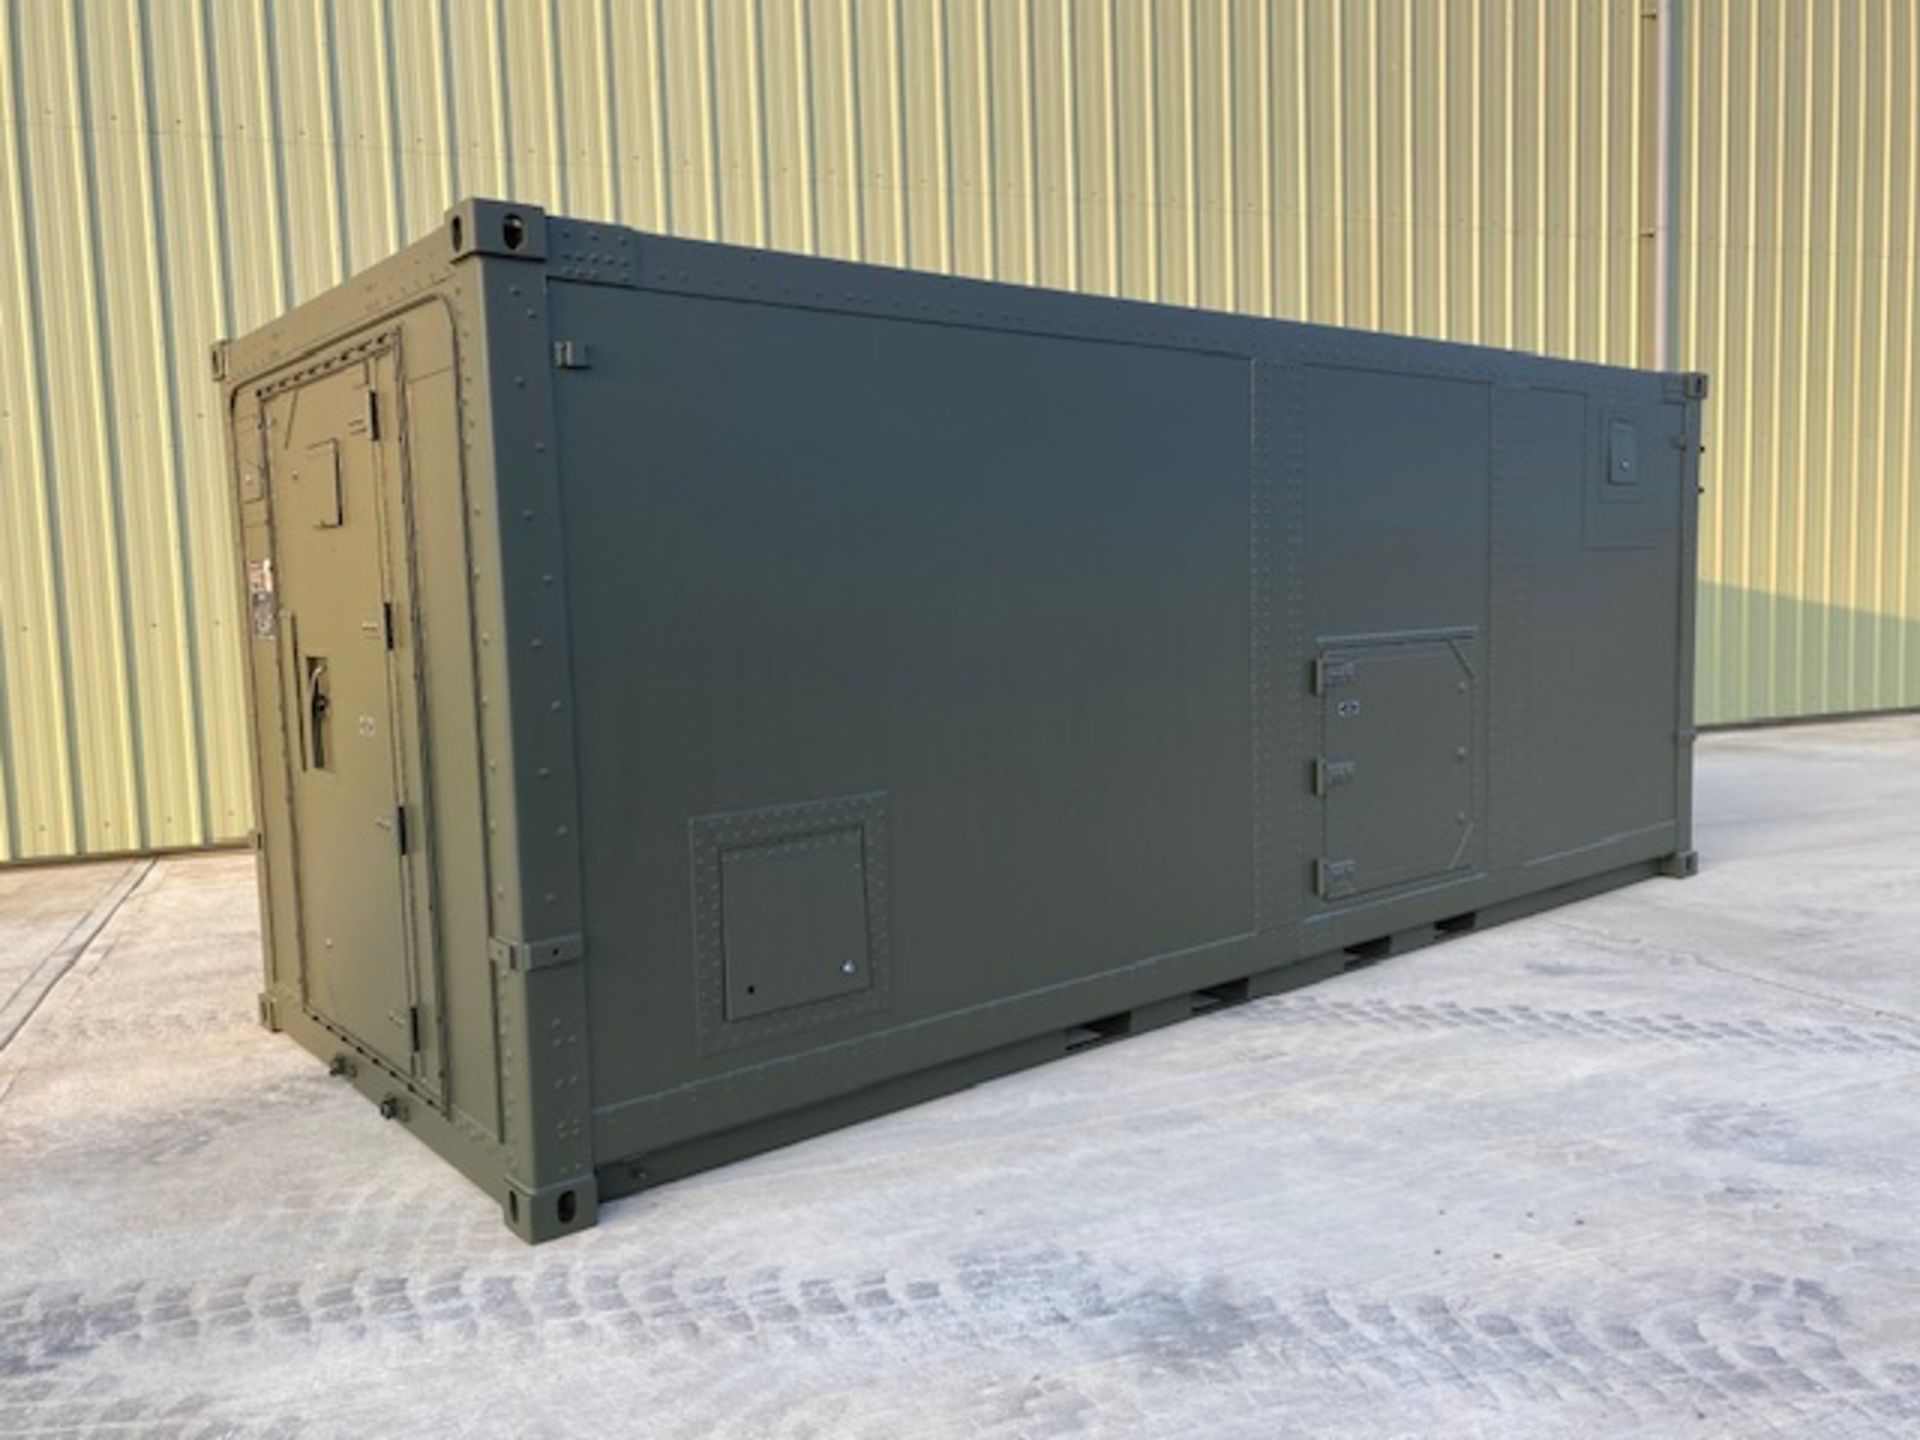 Transportable Lithium-ion Battery Storage & Charging Container From the UK Ministry of Defence - Image 2 of 65